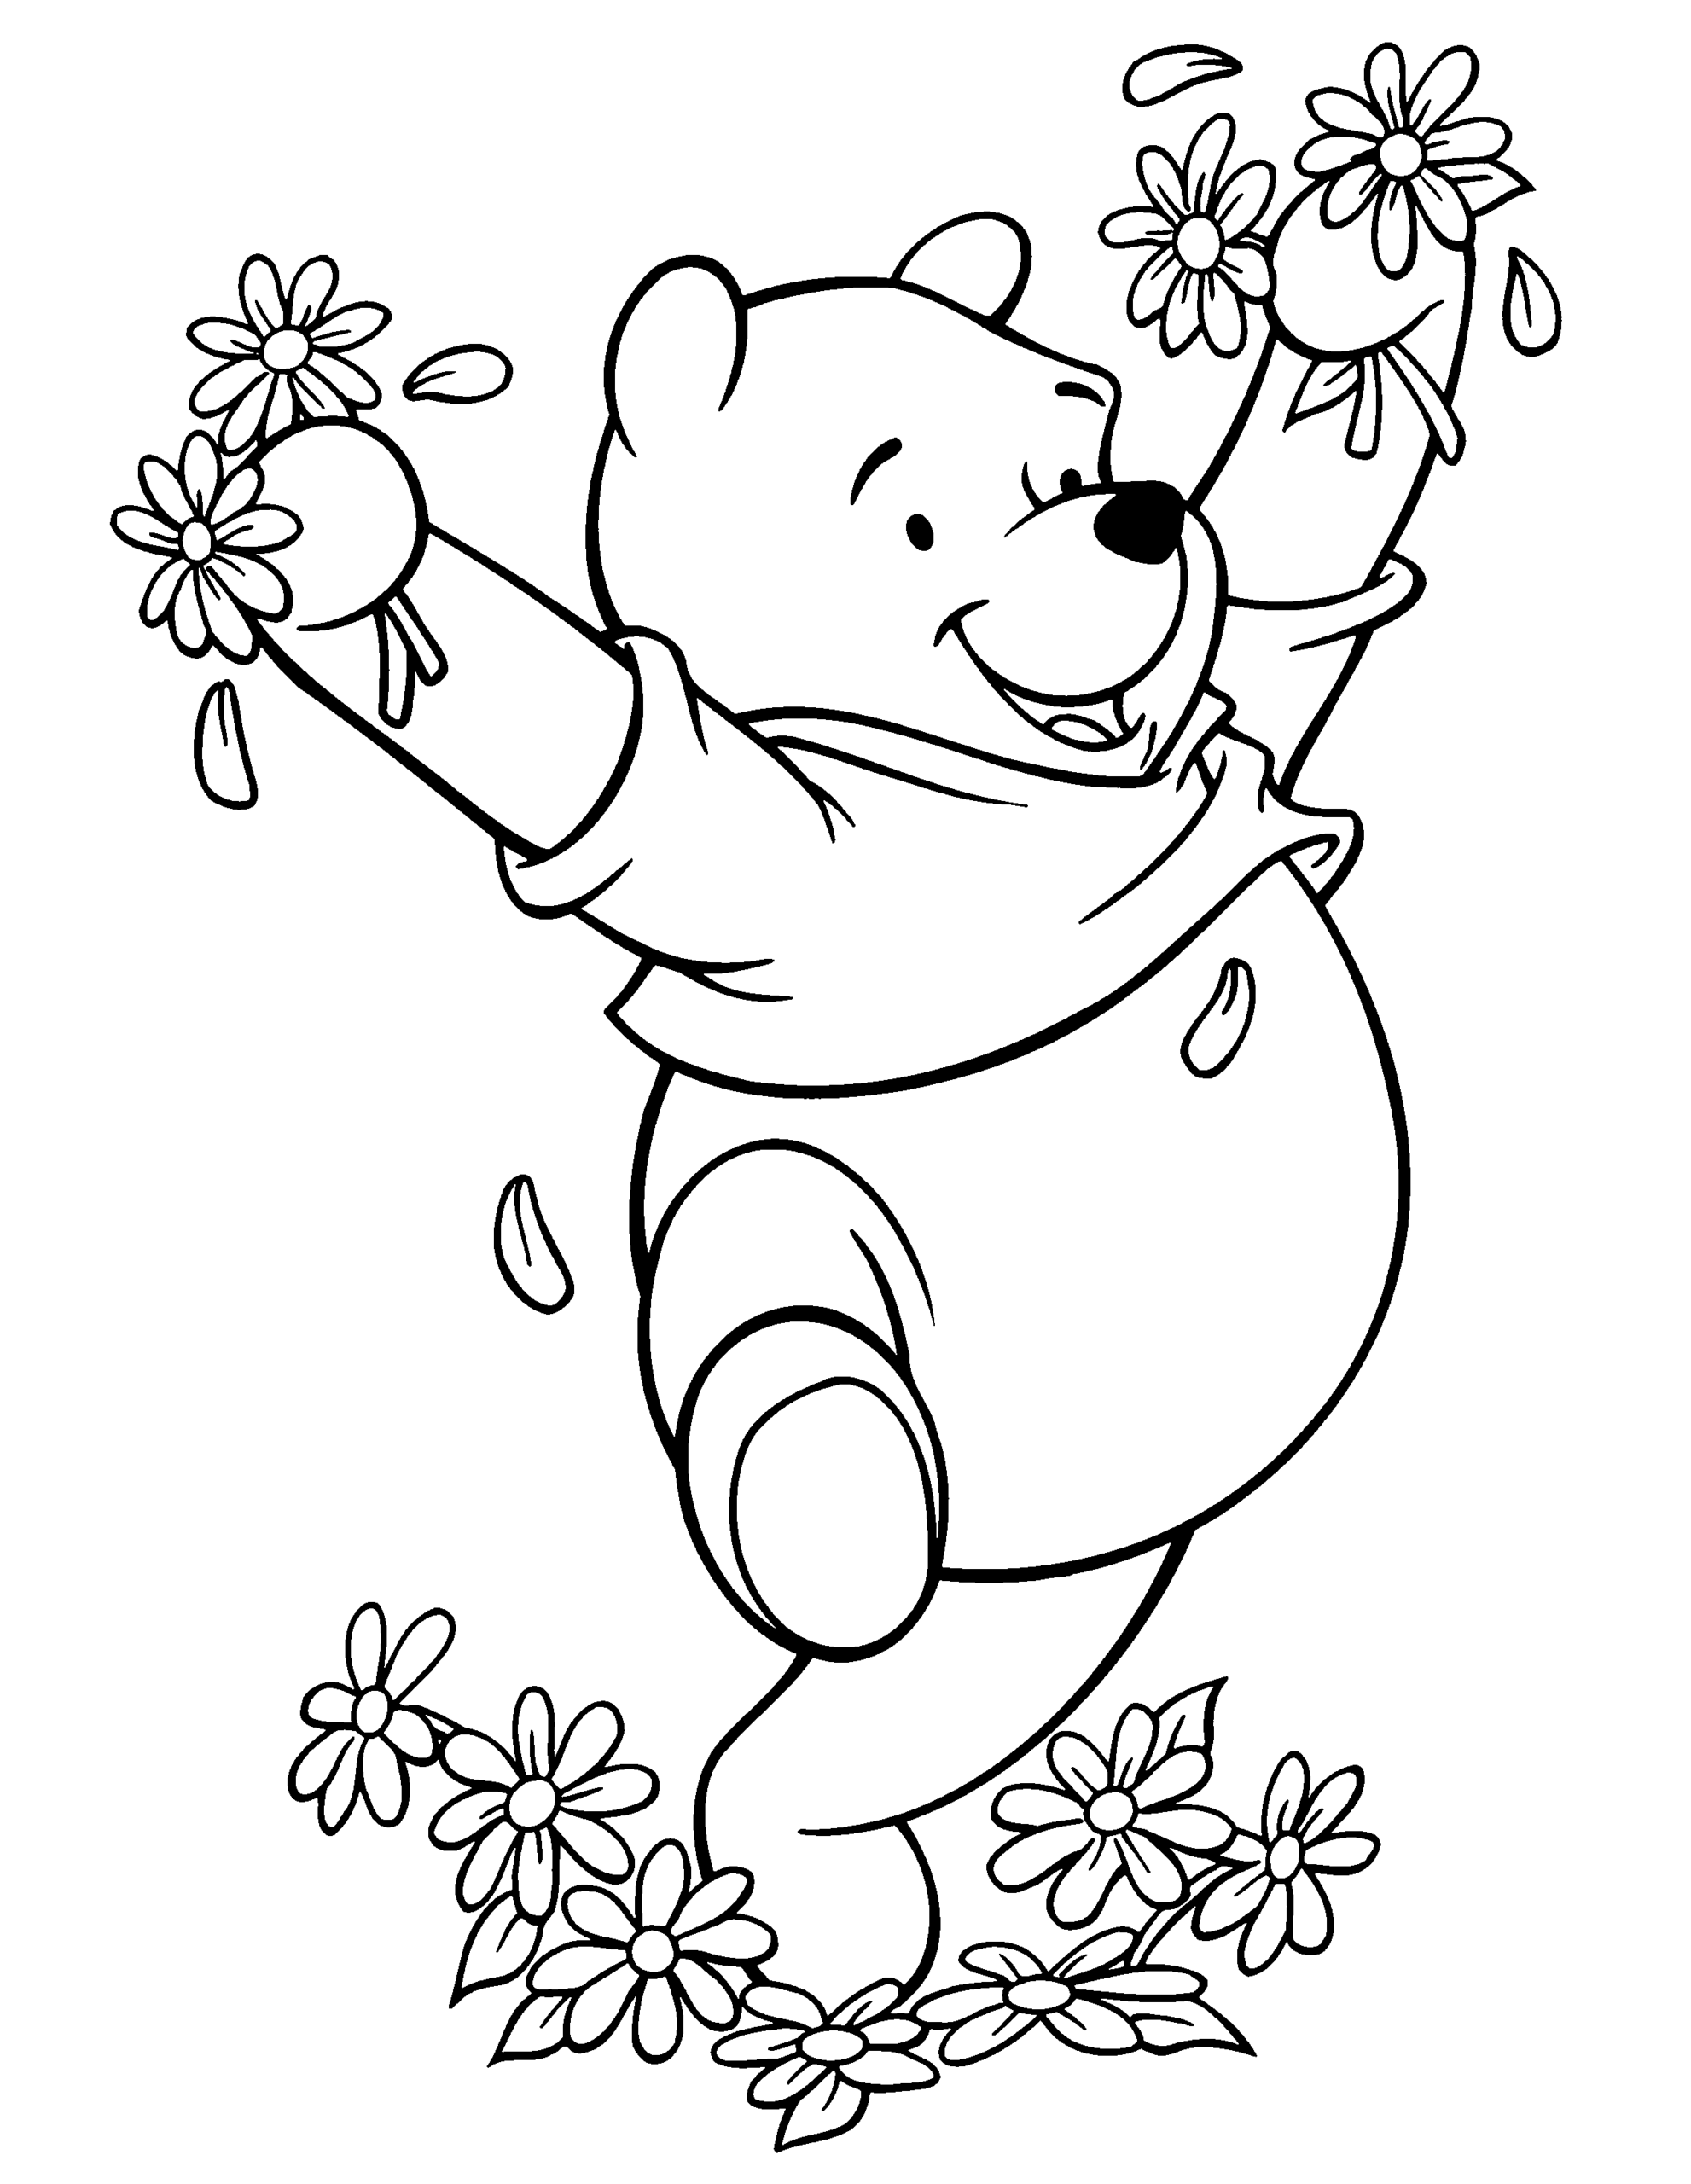 Winnie the Pooh Coloring Pages Cartoons winnie the pooh 115 Printable 2020 7095 Coloring4free